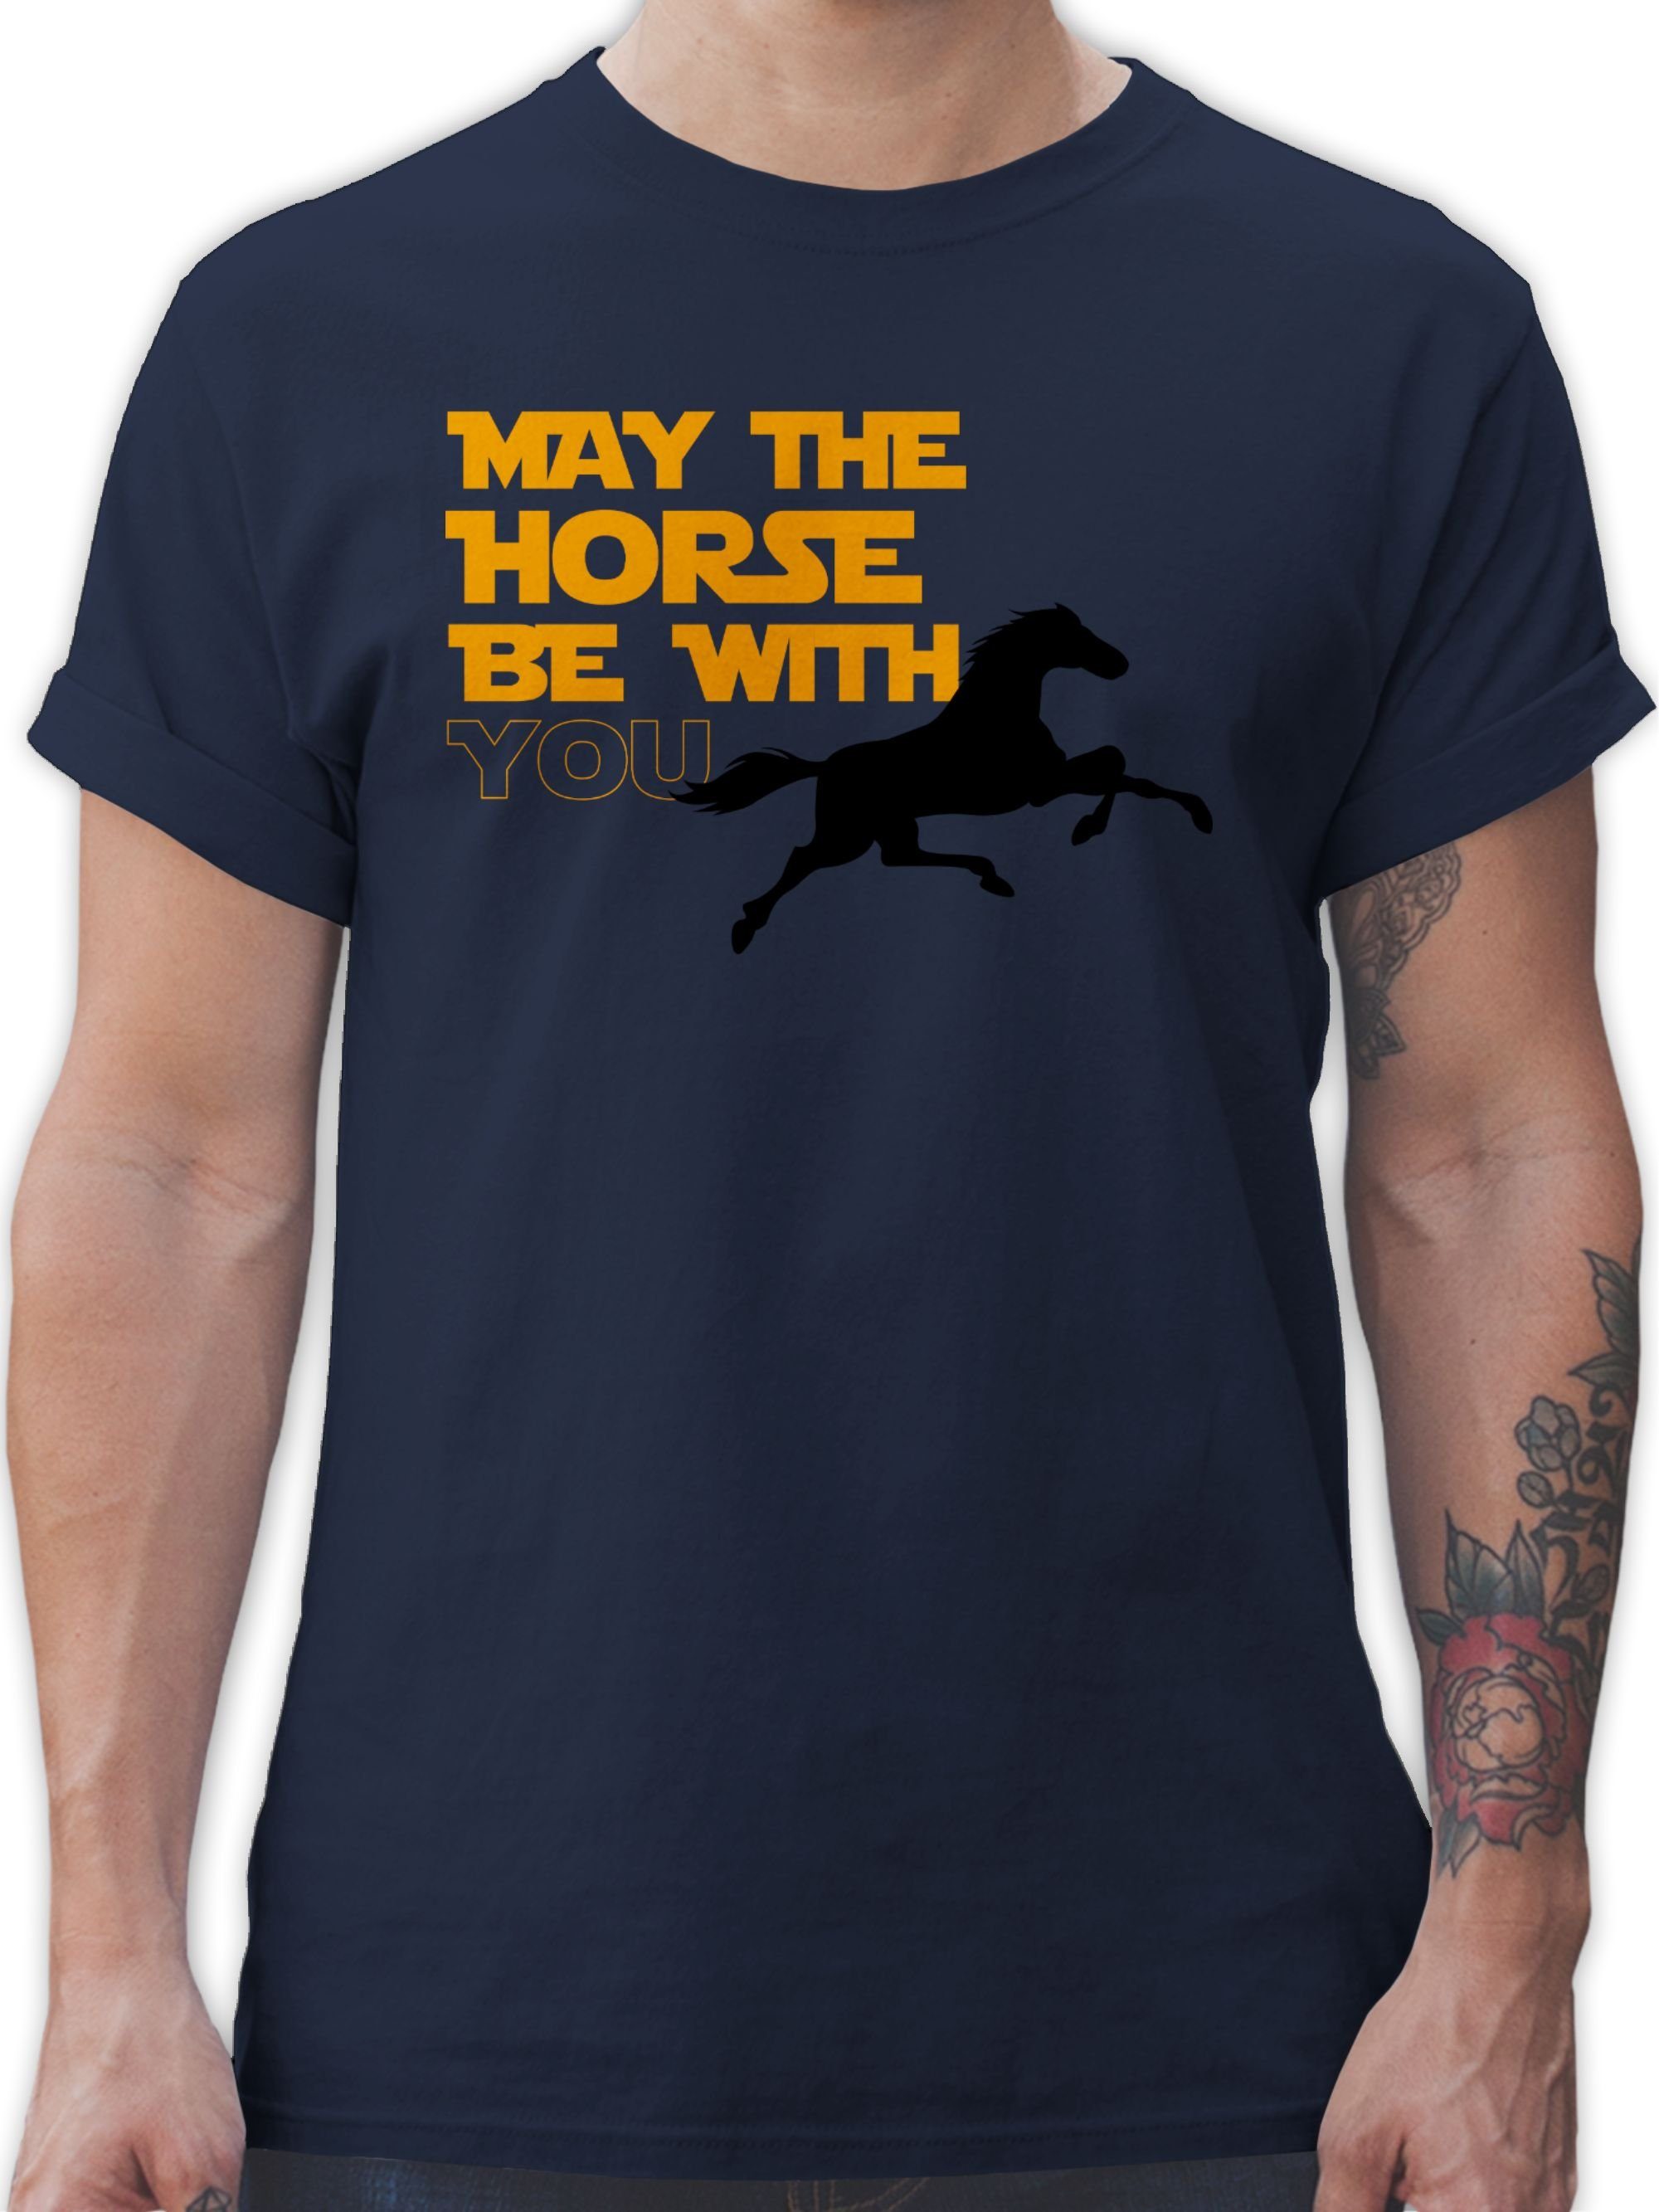 Shirtracer T-Shirt May the horse be with you Pferd 3 Navy Blau